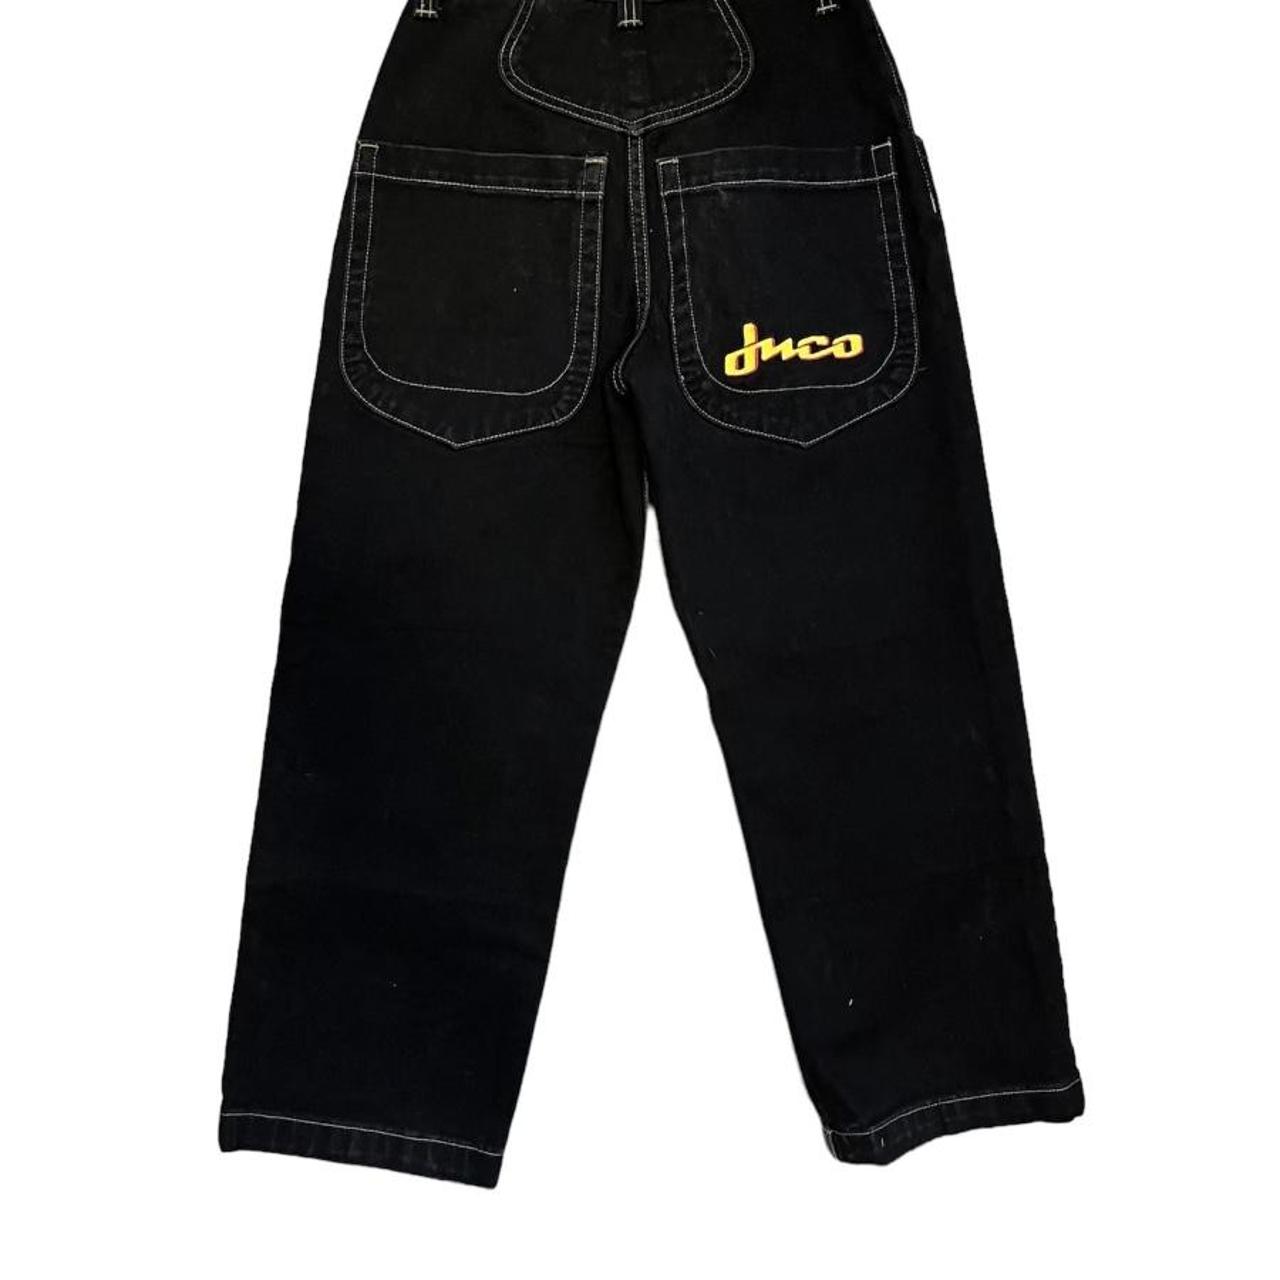 rare 90s jnco jeans almost brand new no flaws,... - Depop